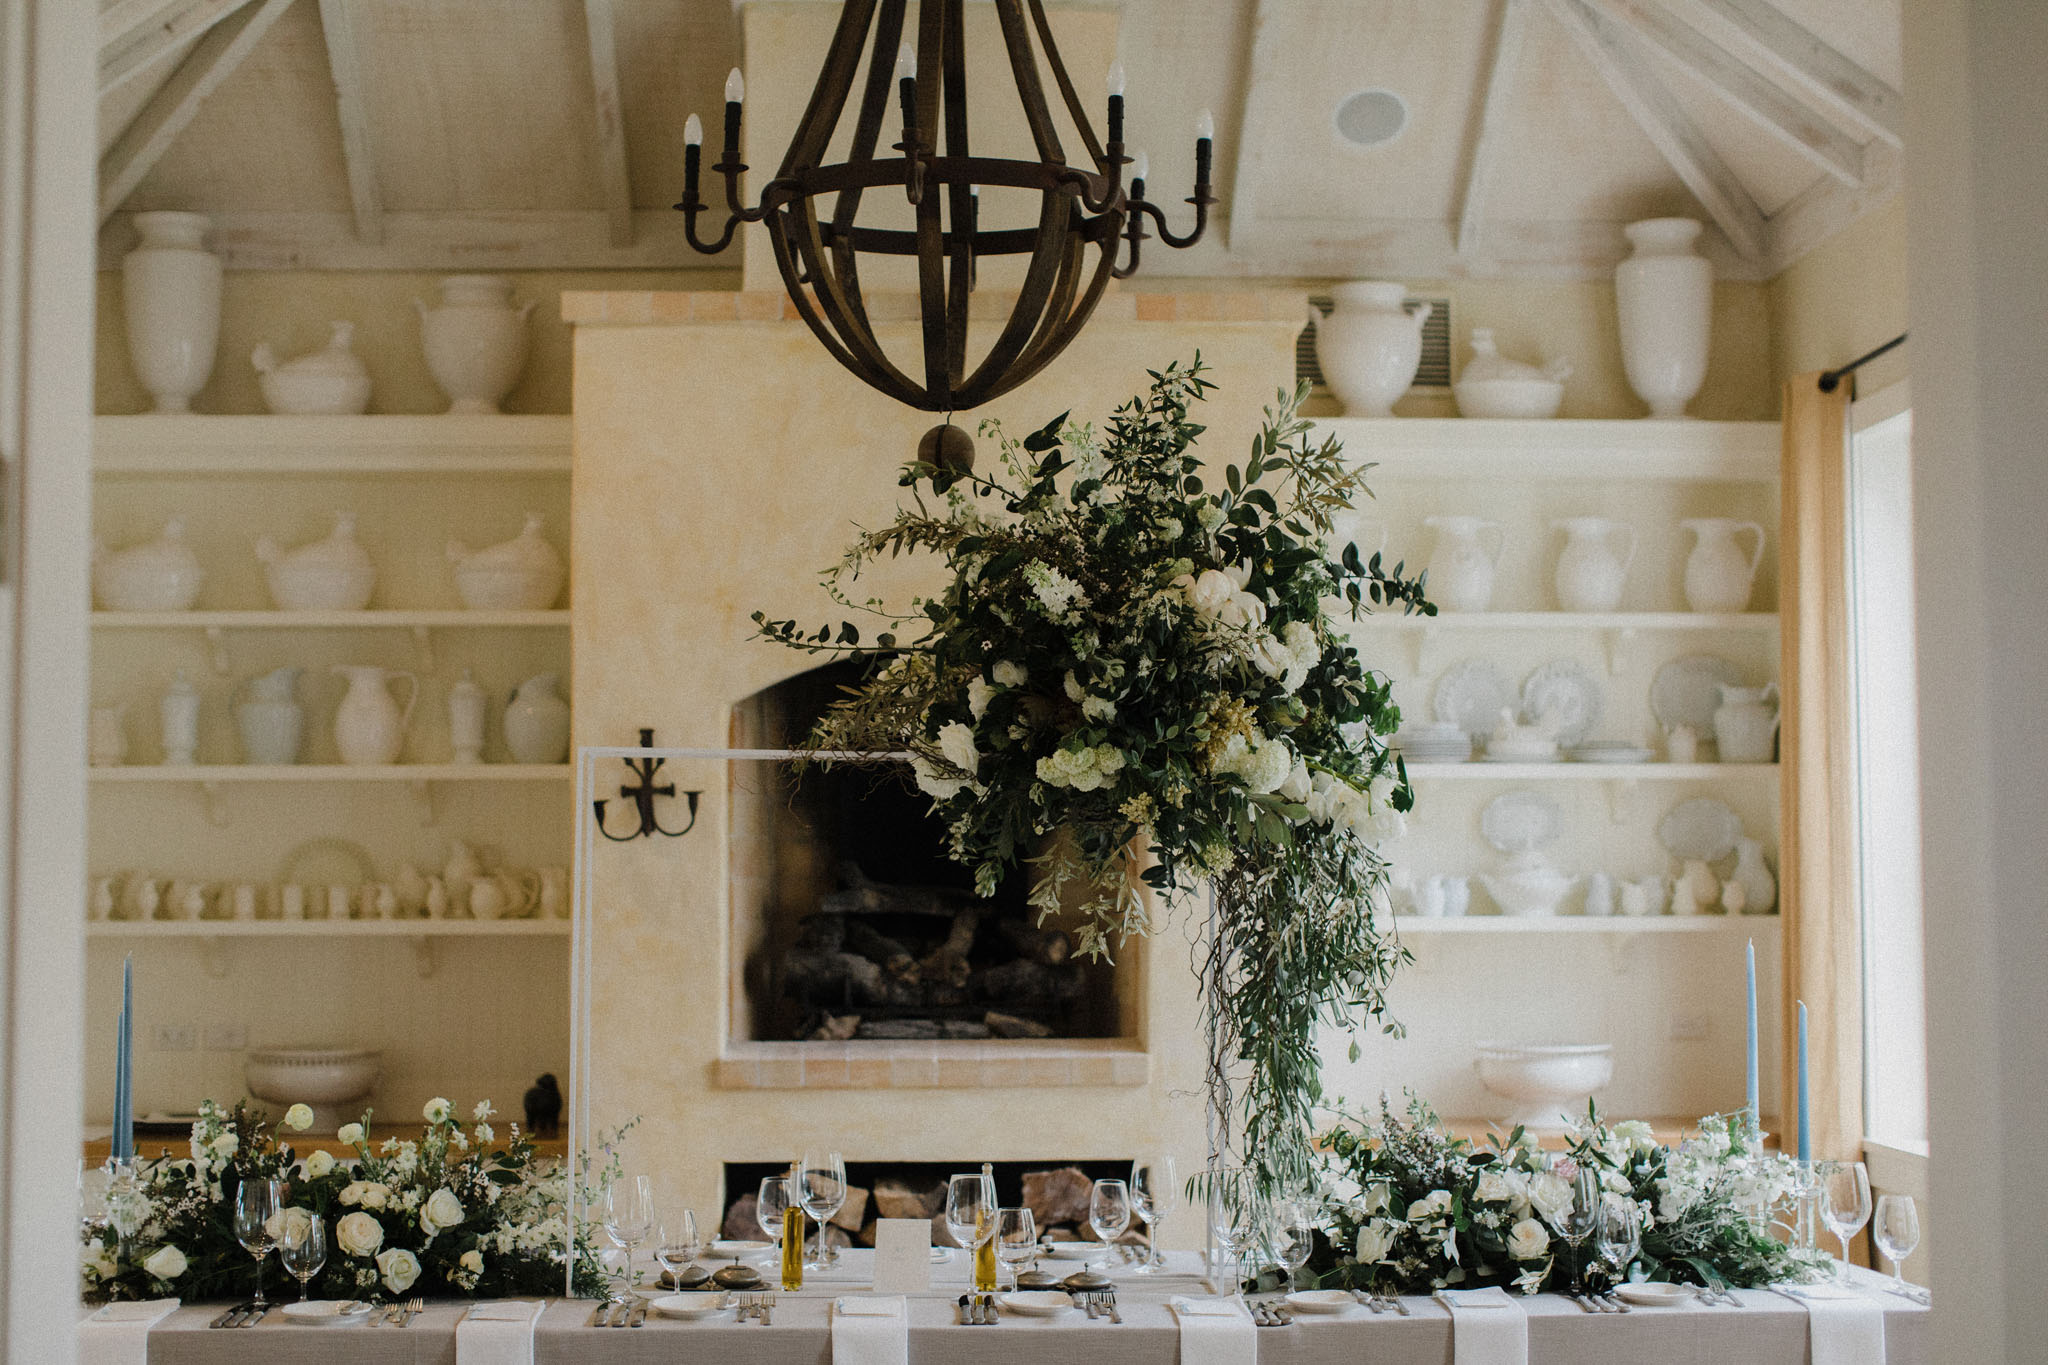 Melissa+Sean Capekidnappers Flowers Table Inspiration 0191